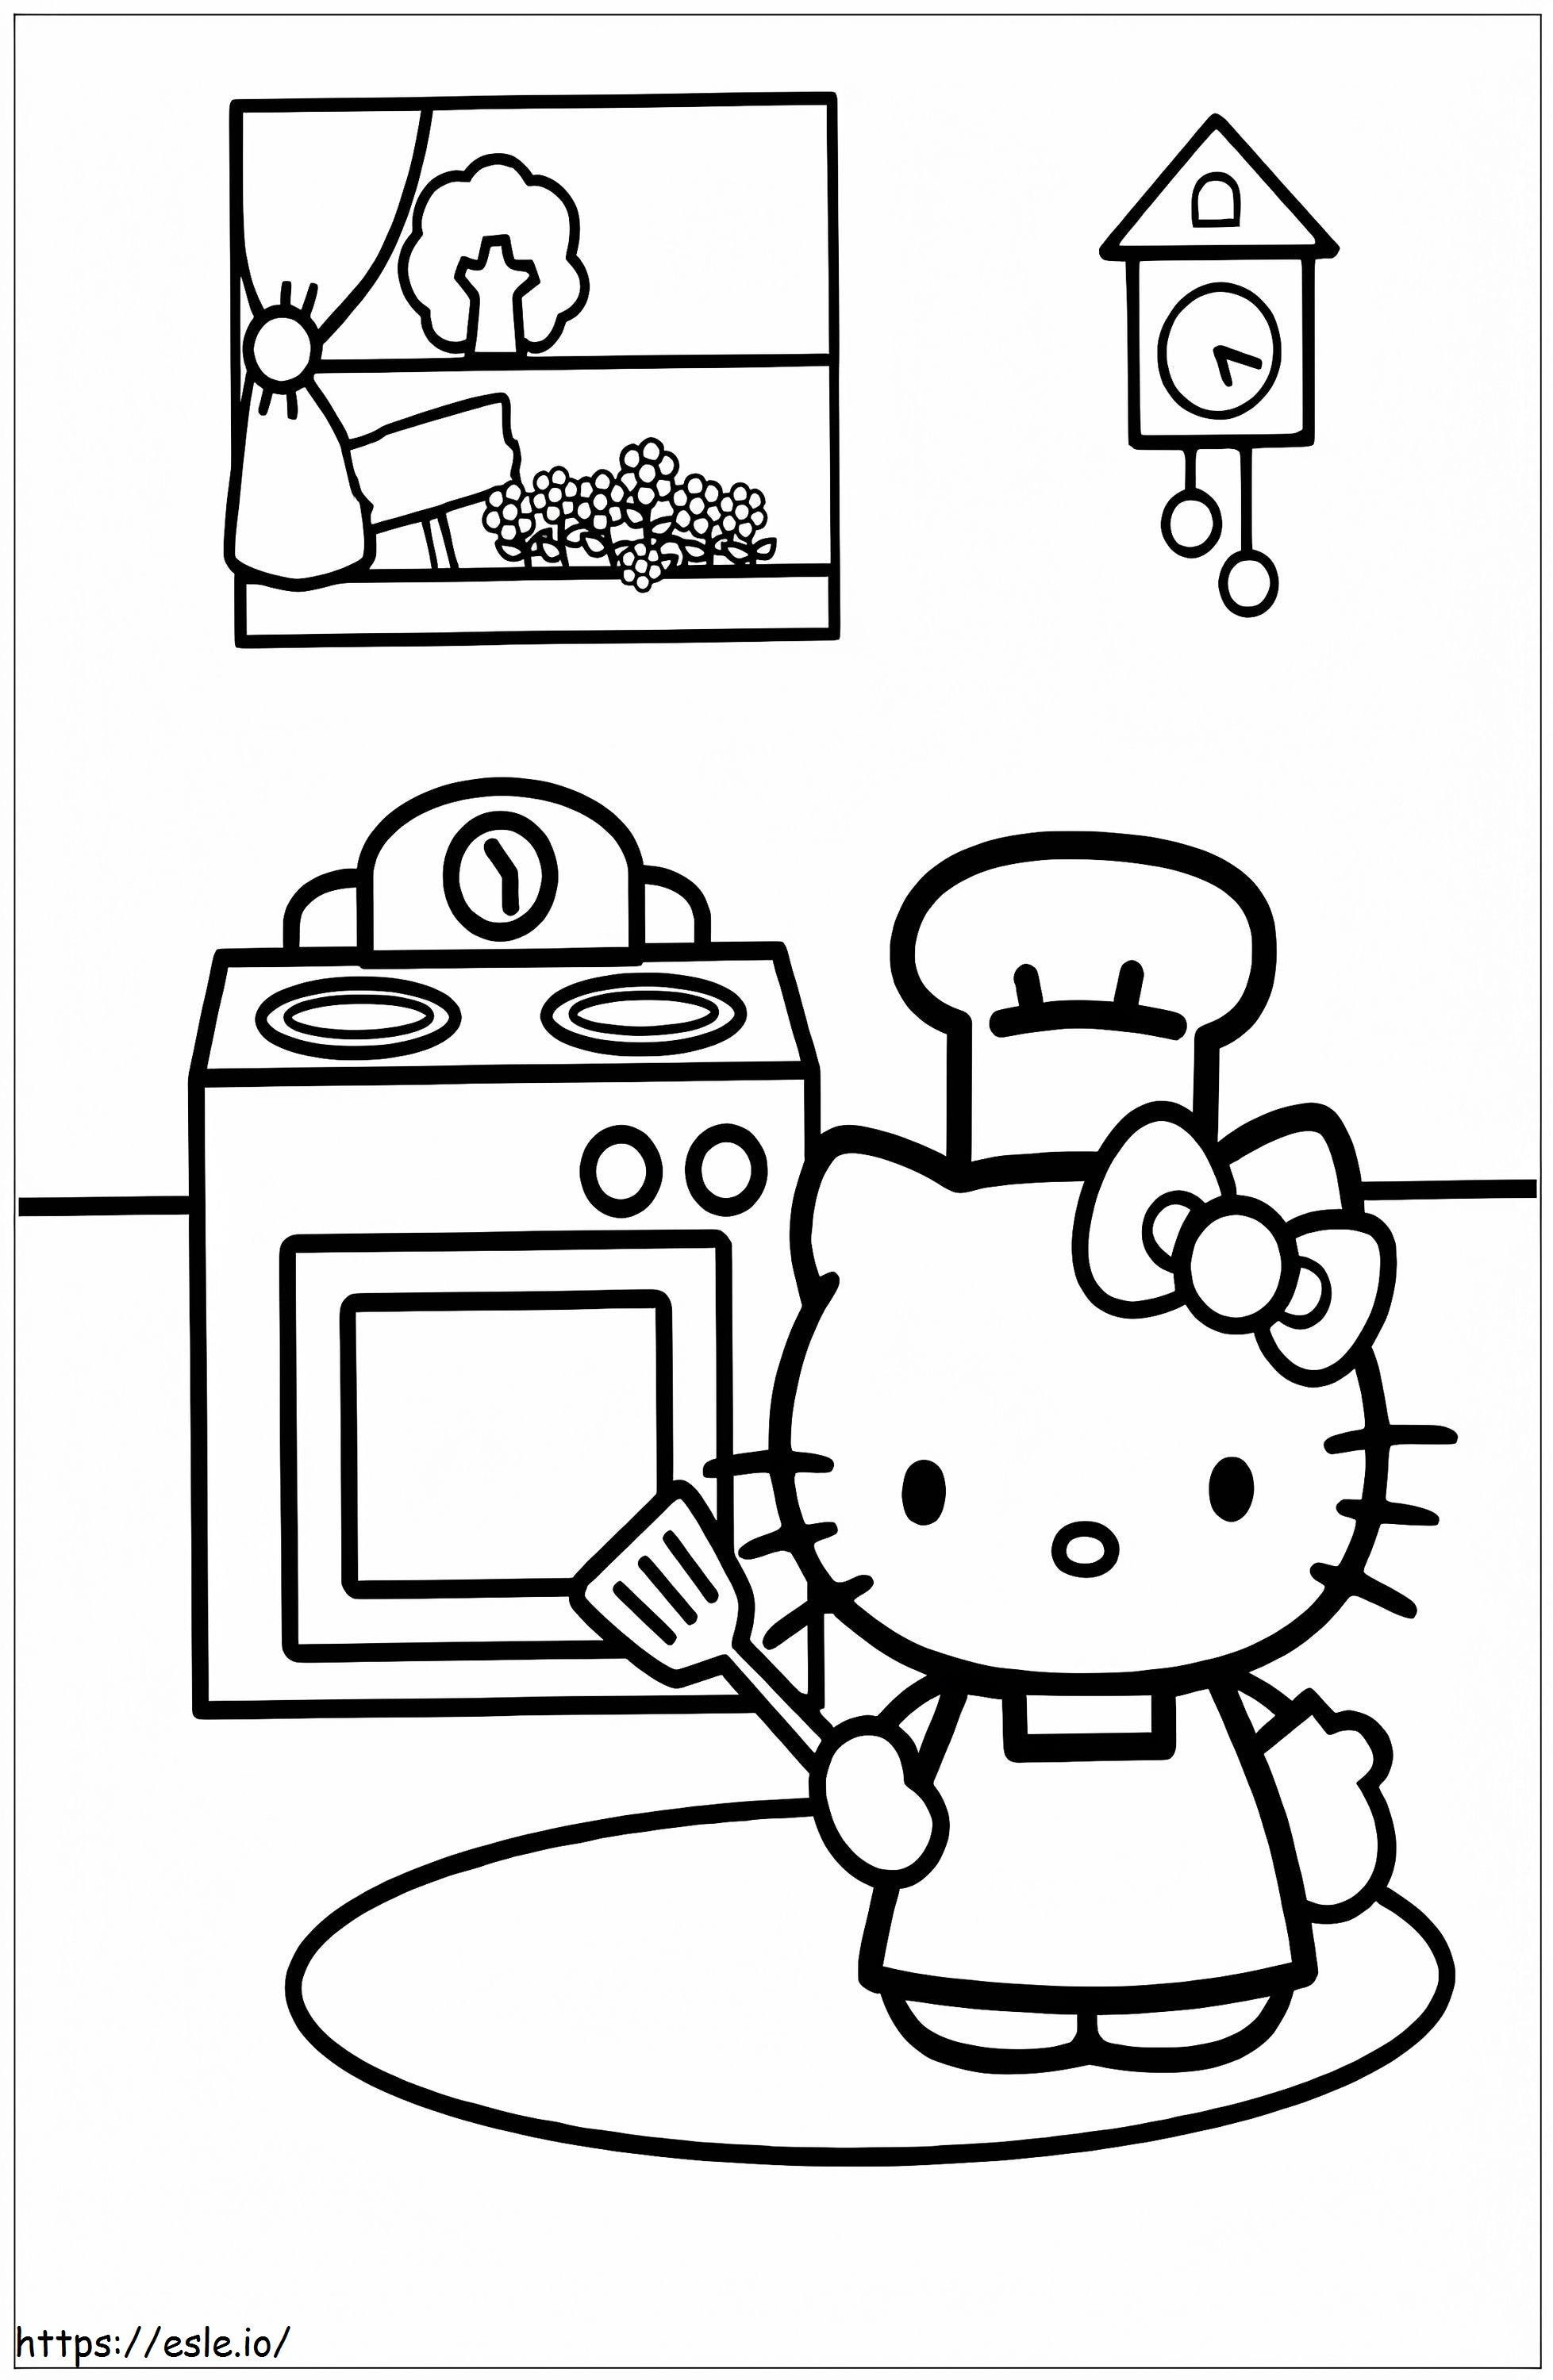 Hello Kitty Cooking In The Kitchen coloring page